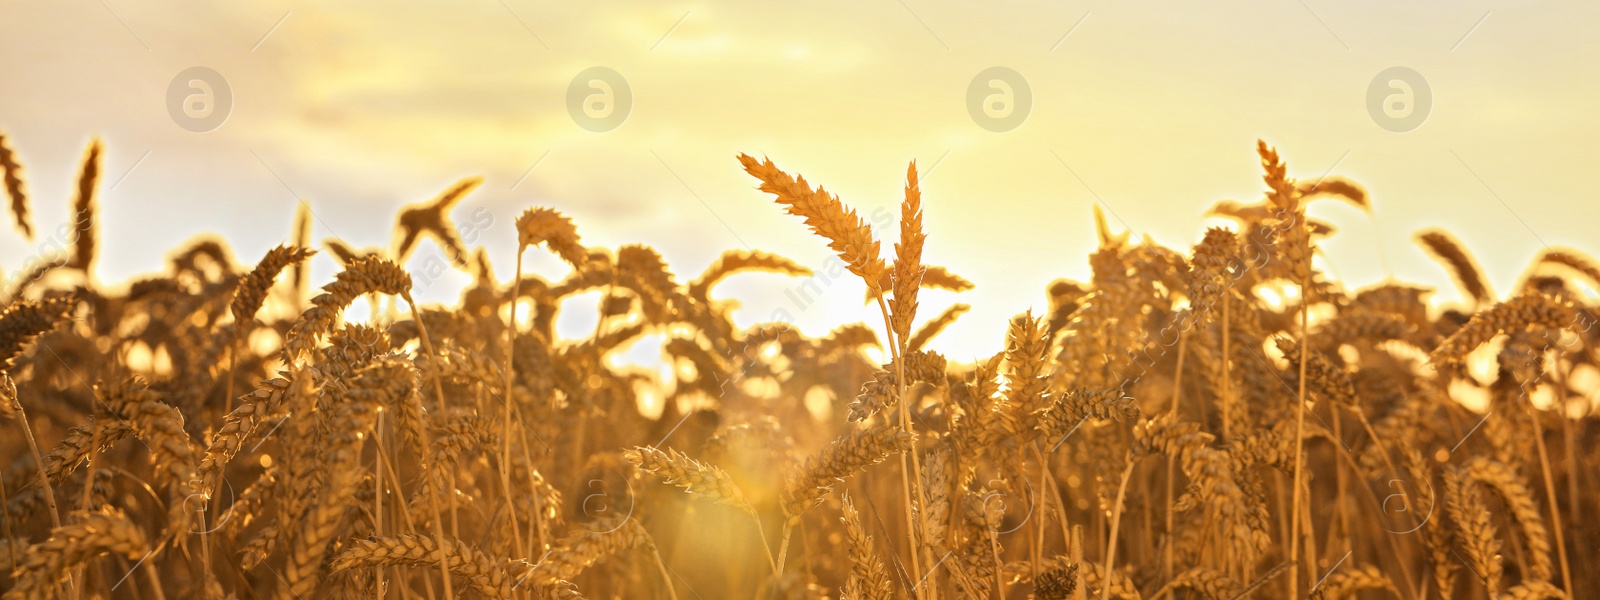 Image of field with ripe wheat spikes on sunny day. Banner design